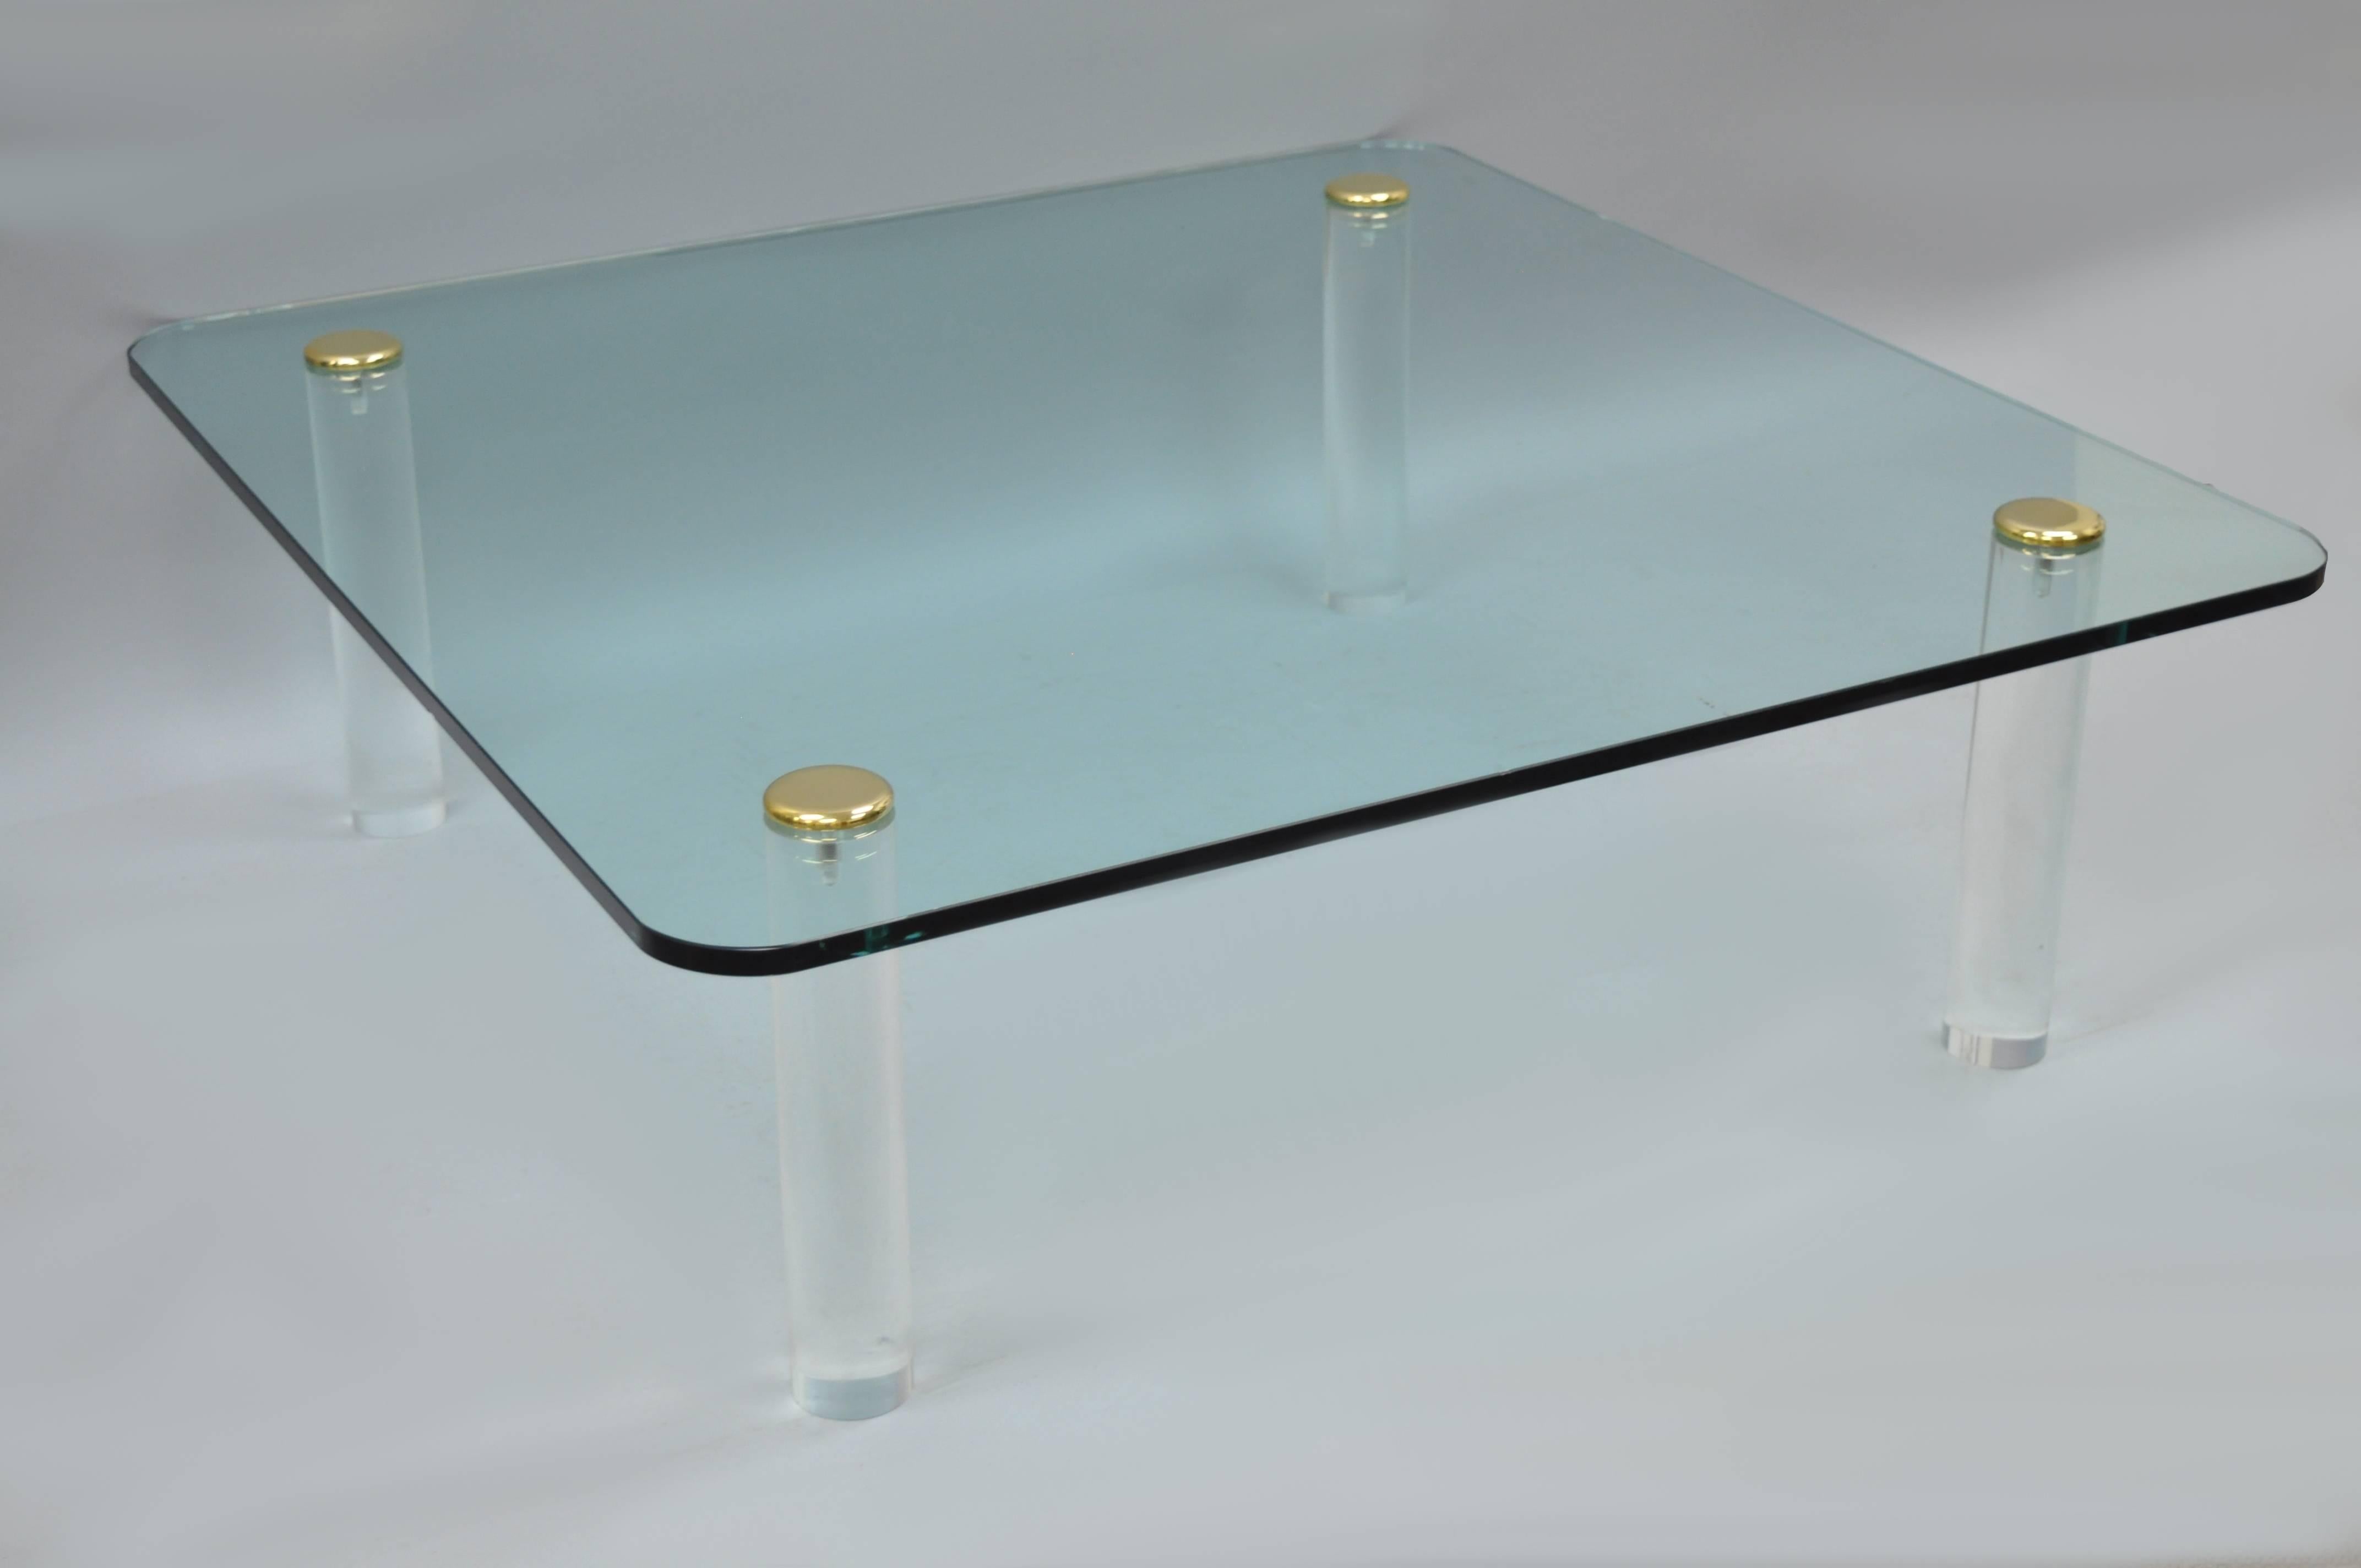 Large vintage 1970s coffee table by Pace collection. Item features a large square .75